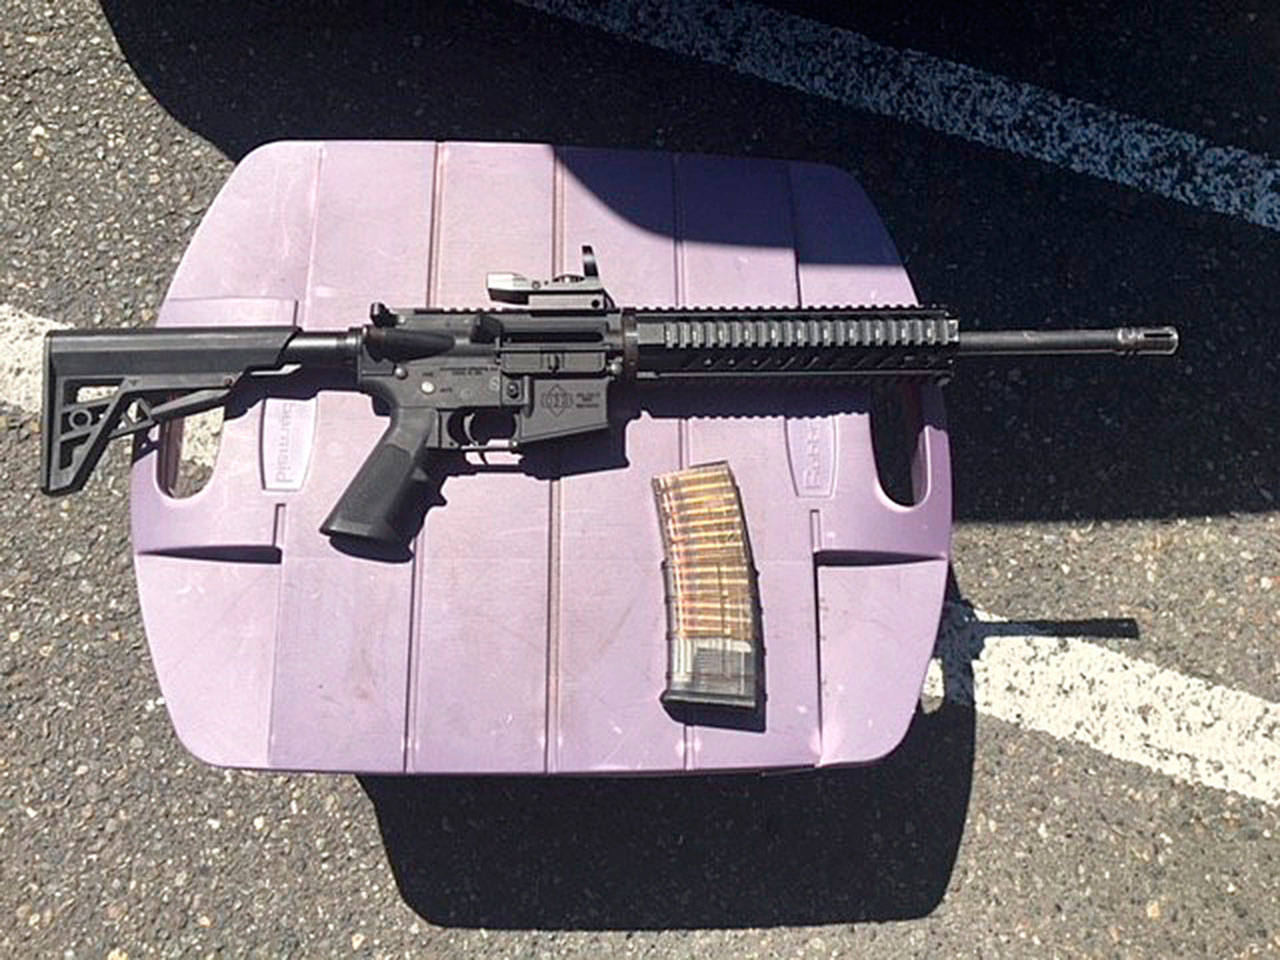 An AR-15 rifle and a loaded magazine were recovered from a suspect in a shooting incident at the Kent Station parking garage in 2019. (King County Sheriff’s Office)